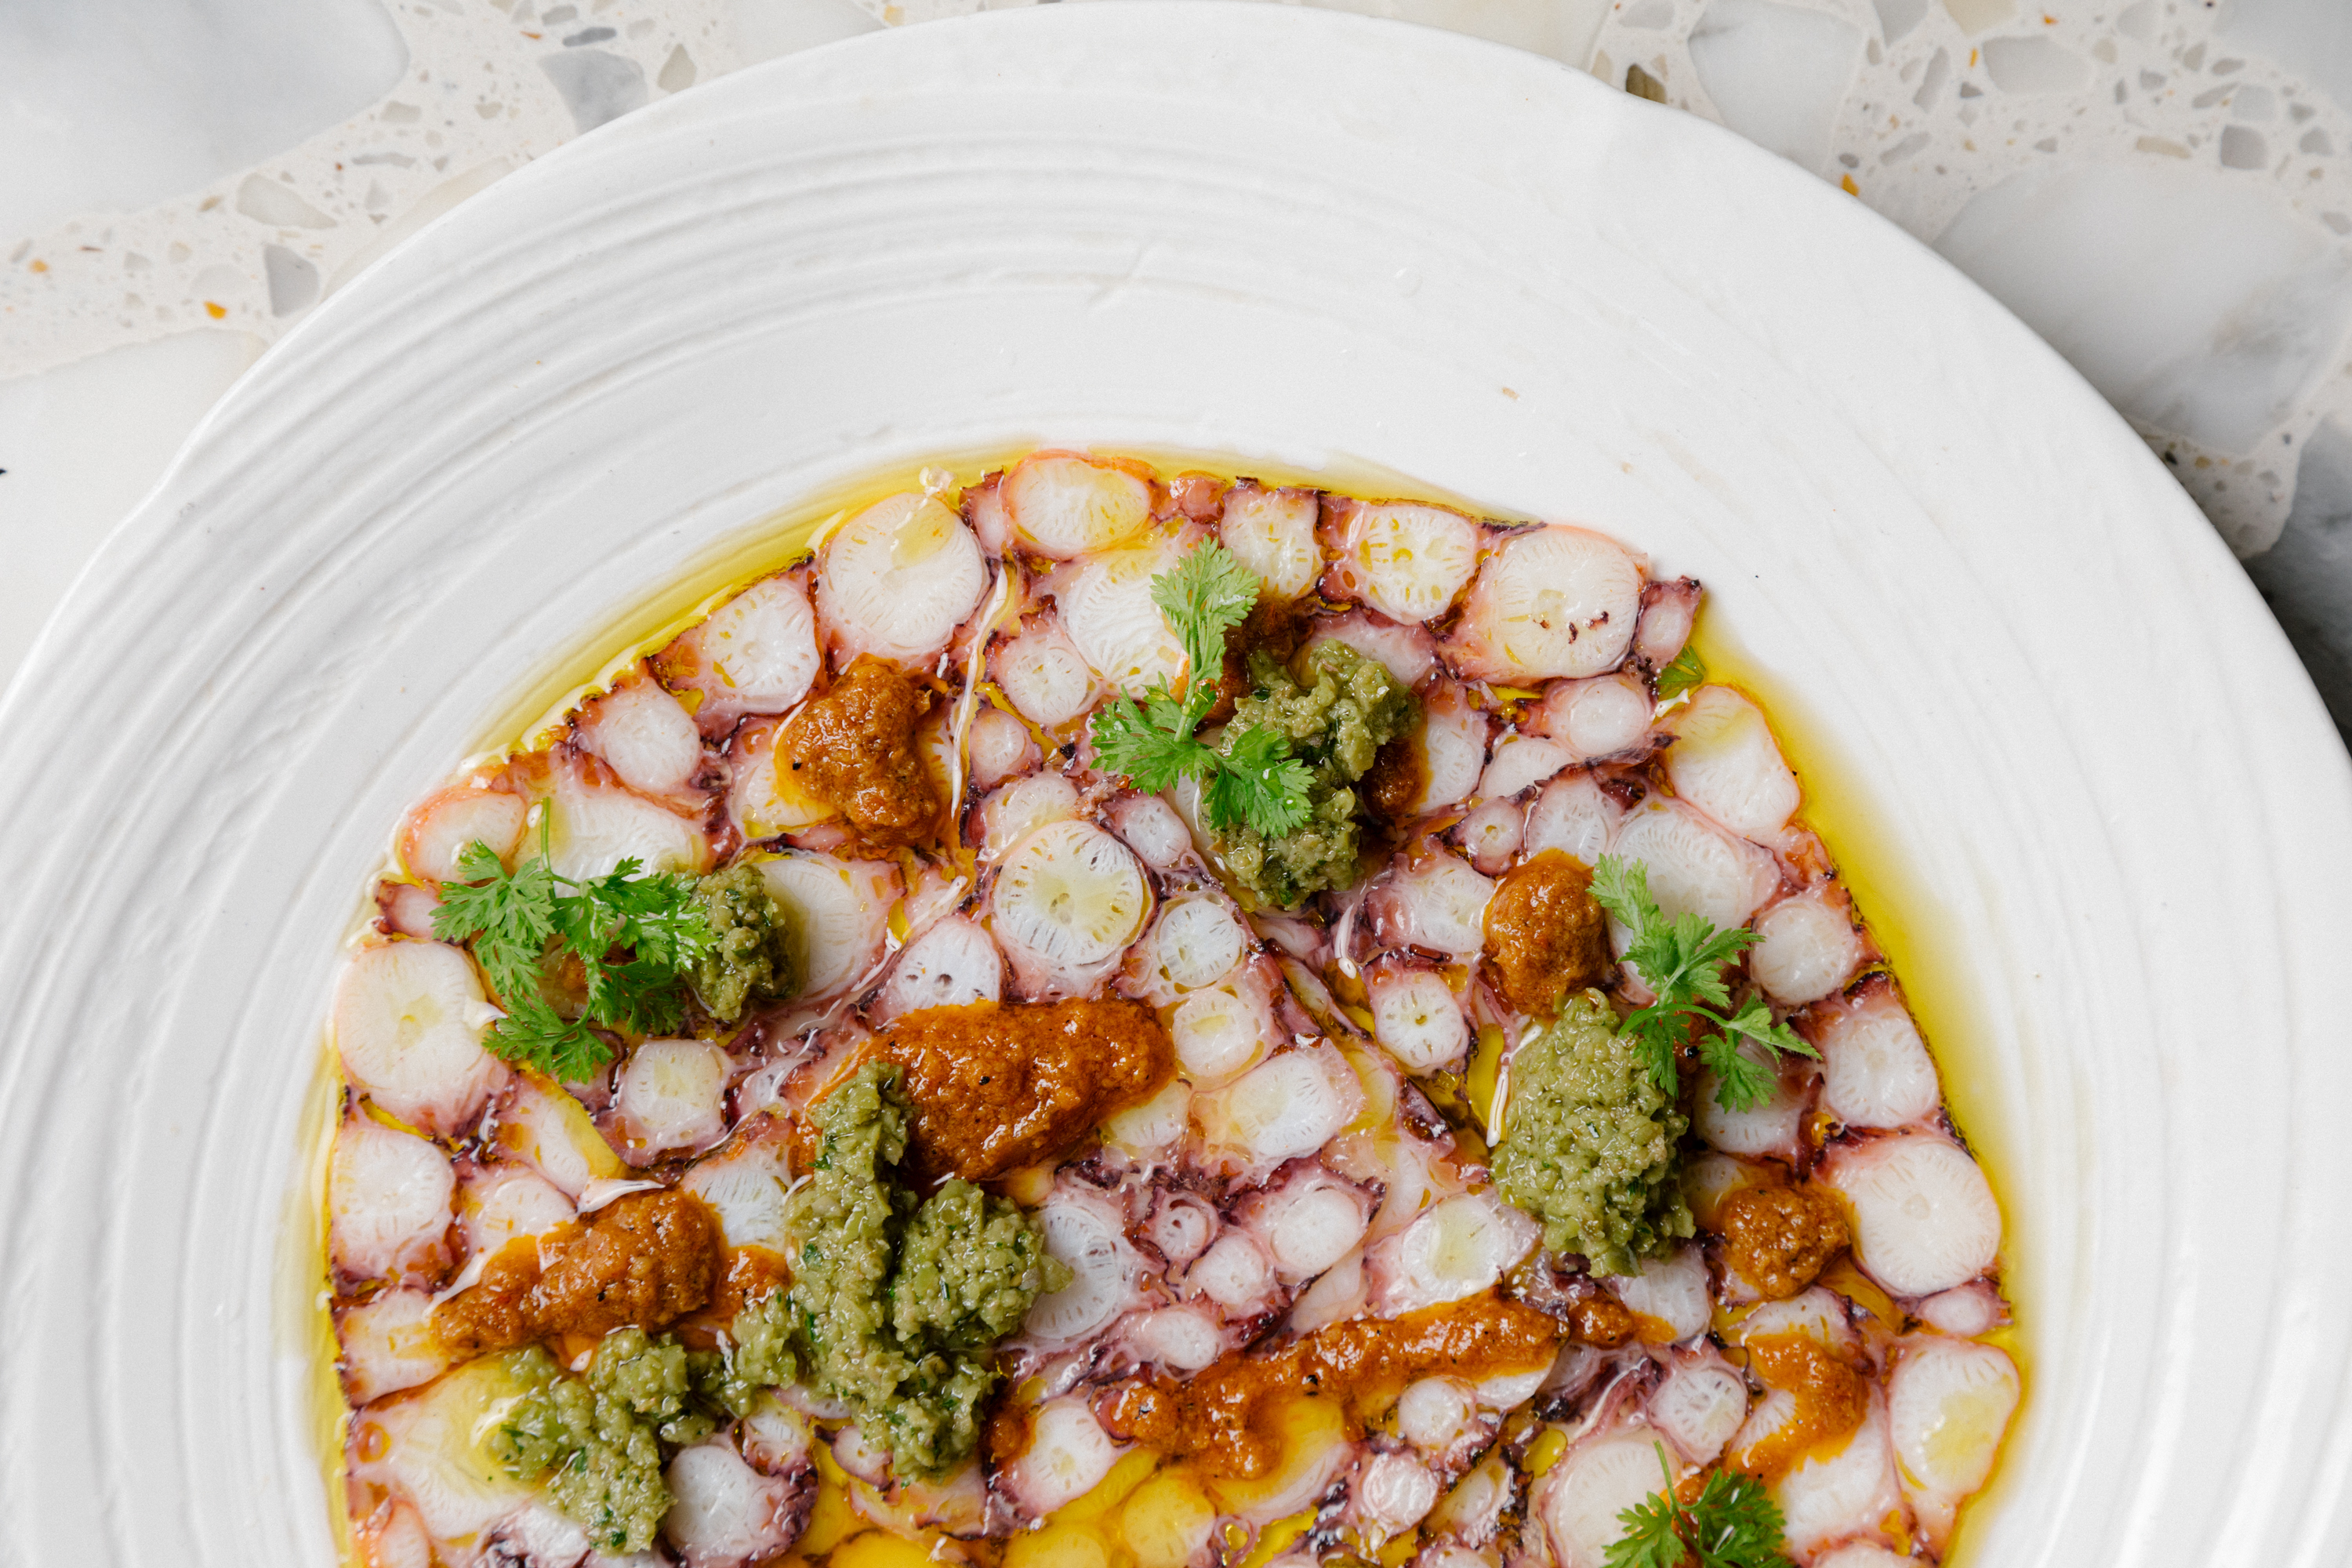 A close up photo of the dish &quot;Octopus and Sujuk&quot; which is filled with white and pink thinly sliced octopus, green olive-caper dressing and a yellow pork sujuk sauce in a ceramic white dish.